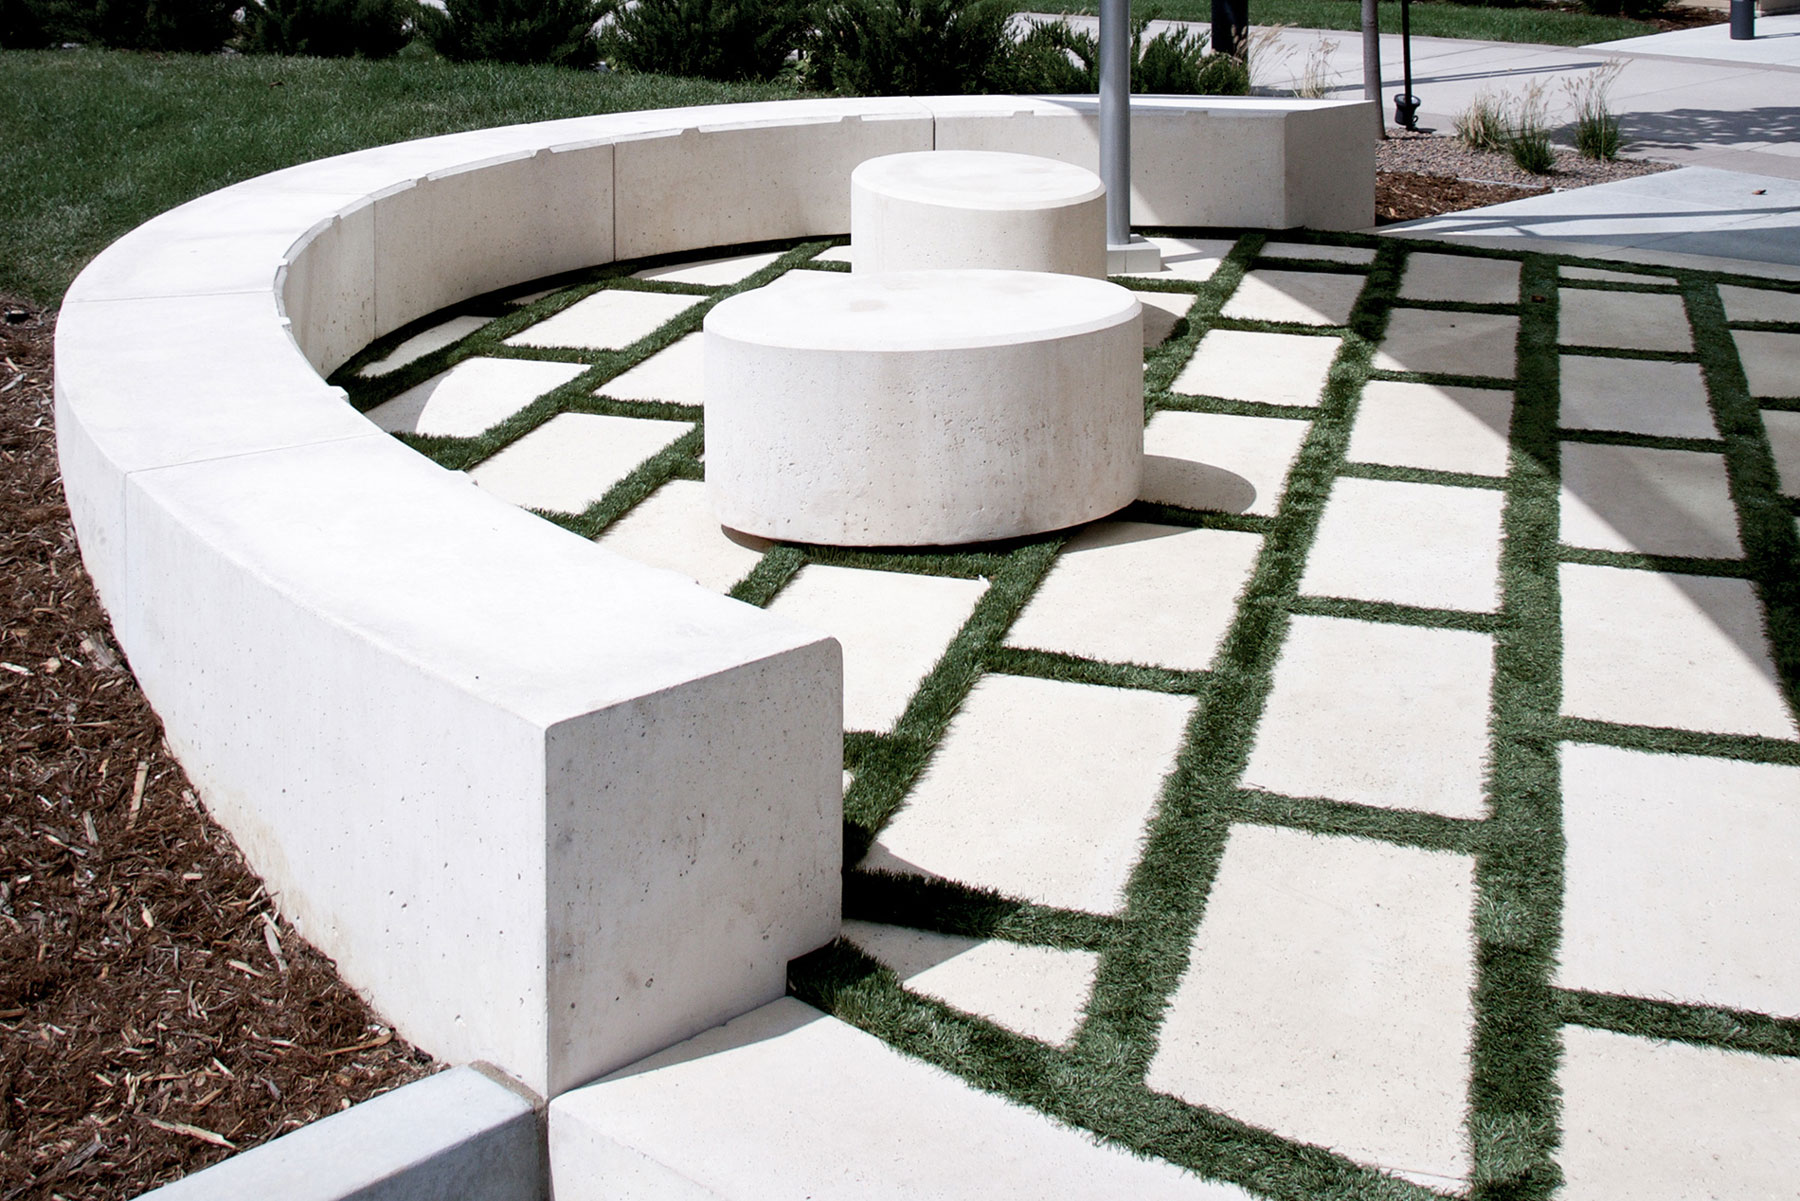 Healthy grass with Rectangle Pavers make a pleasant patio tiling